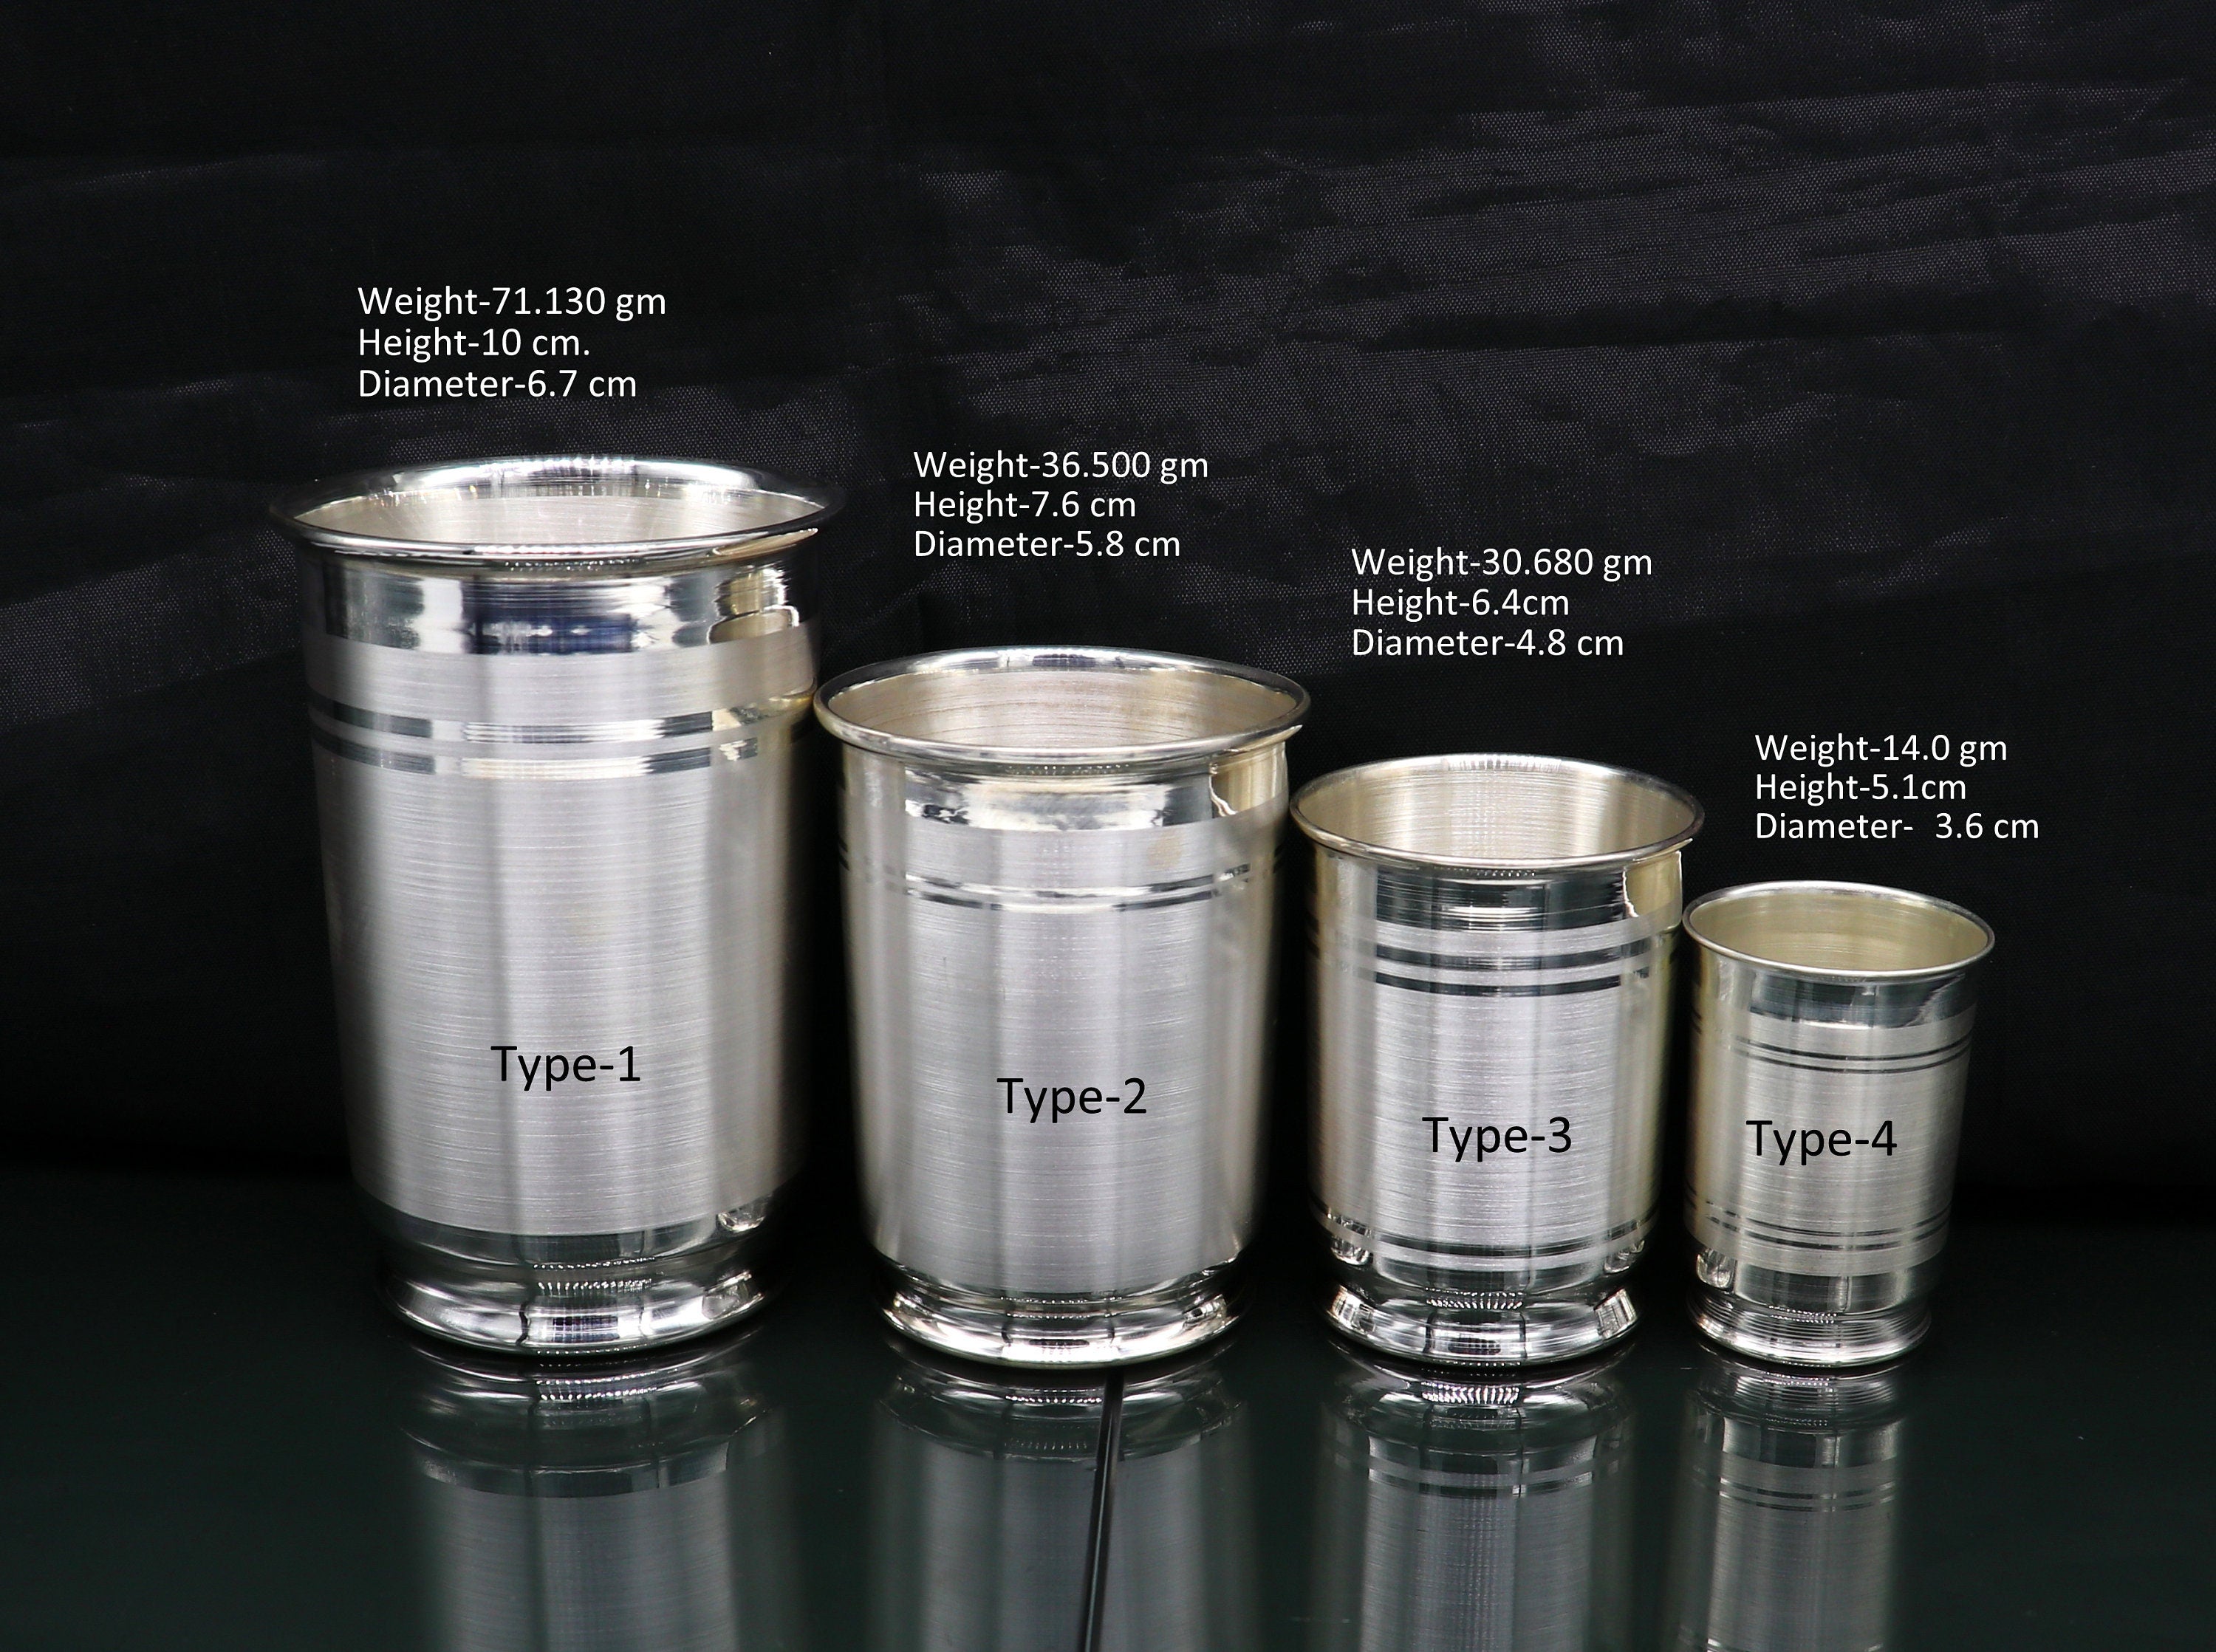 Osasbazaar Pure Silver Glass Tumbler 90%92.5% BIS Hallmarked Silver Online  in India, Buy at Best Price from Firstcry.com - 12064782